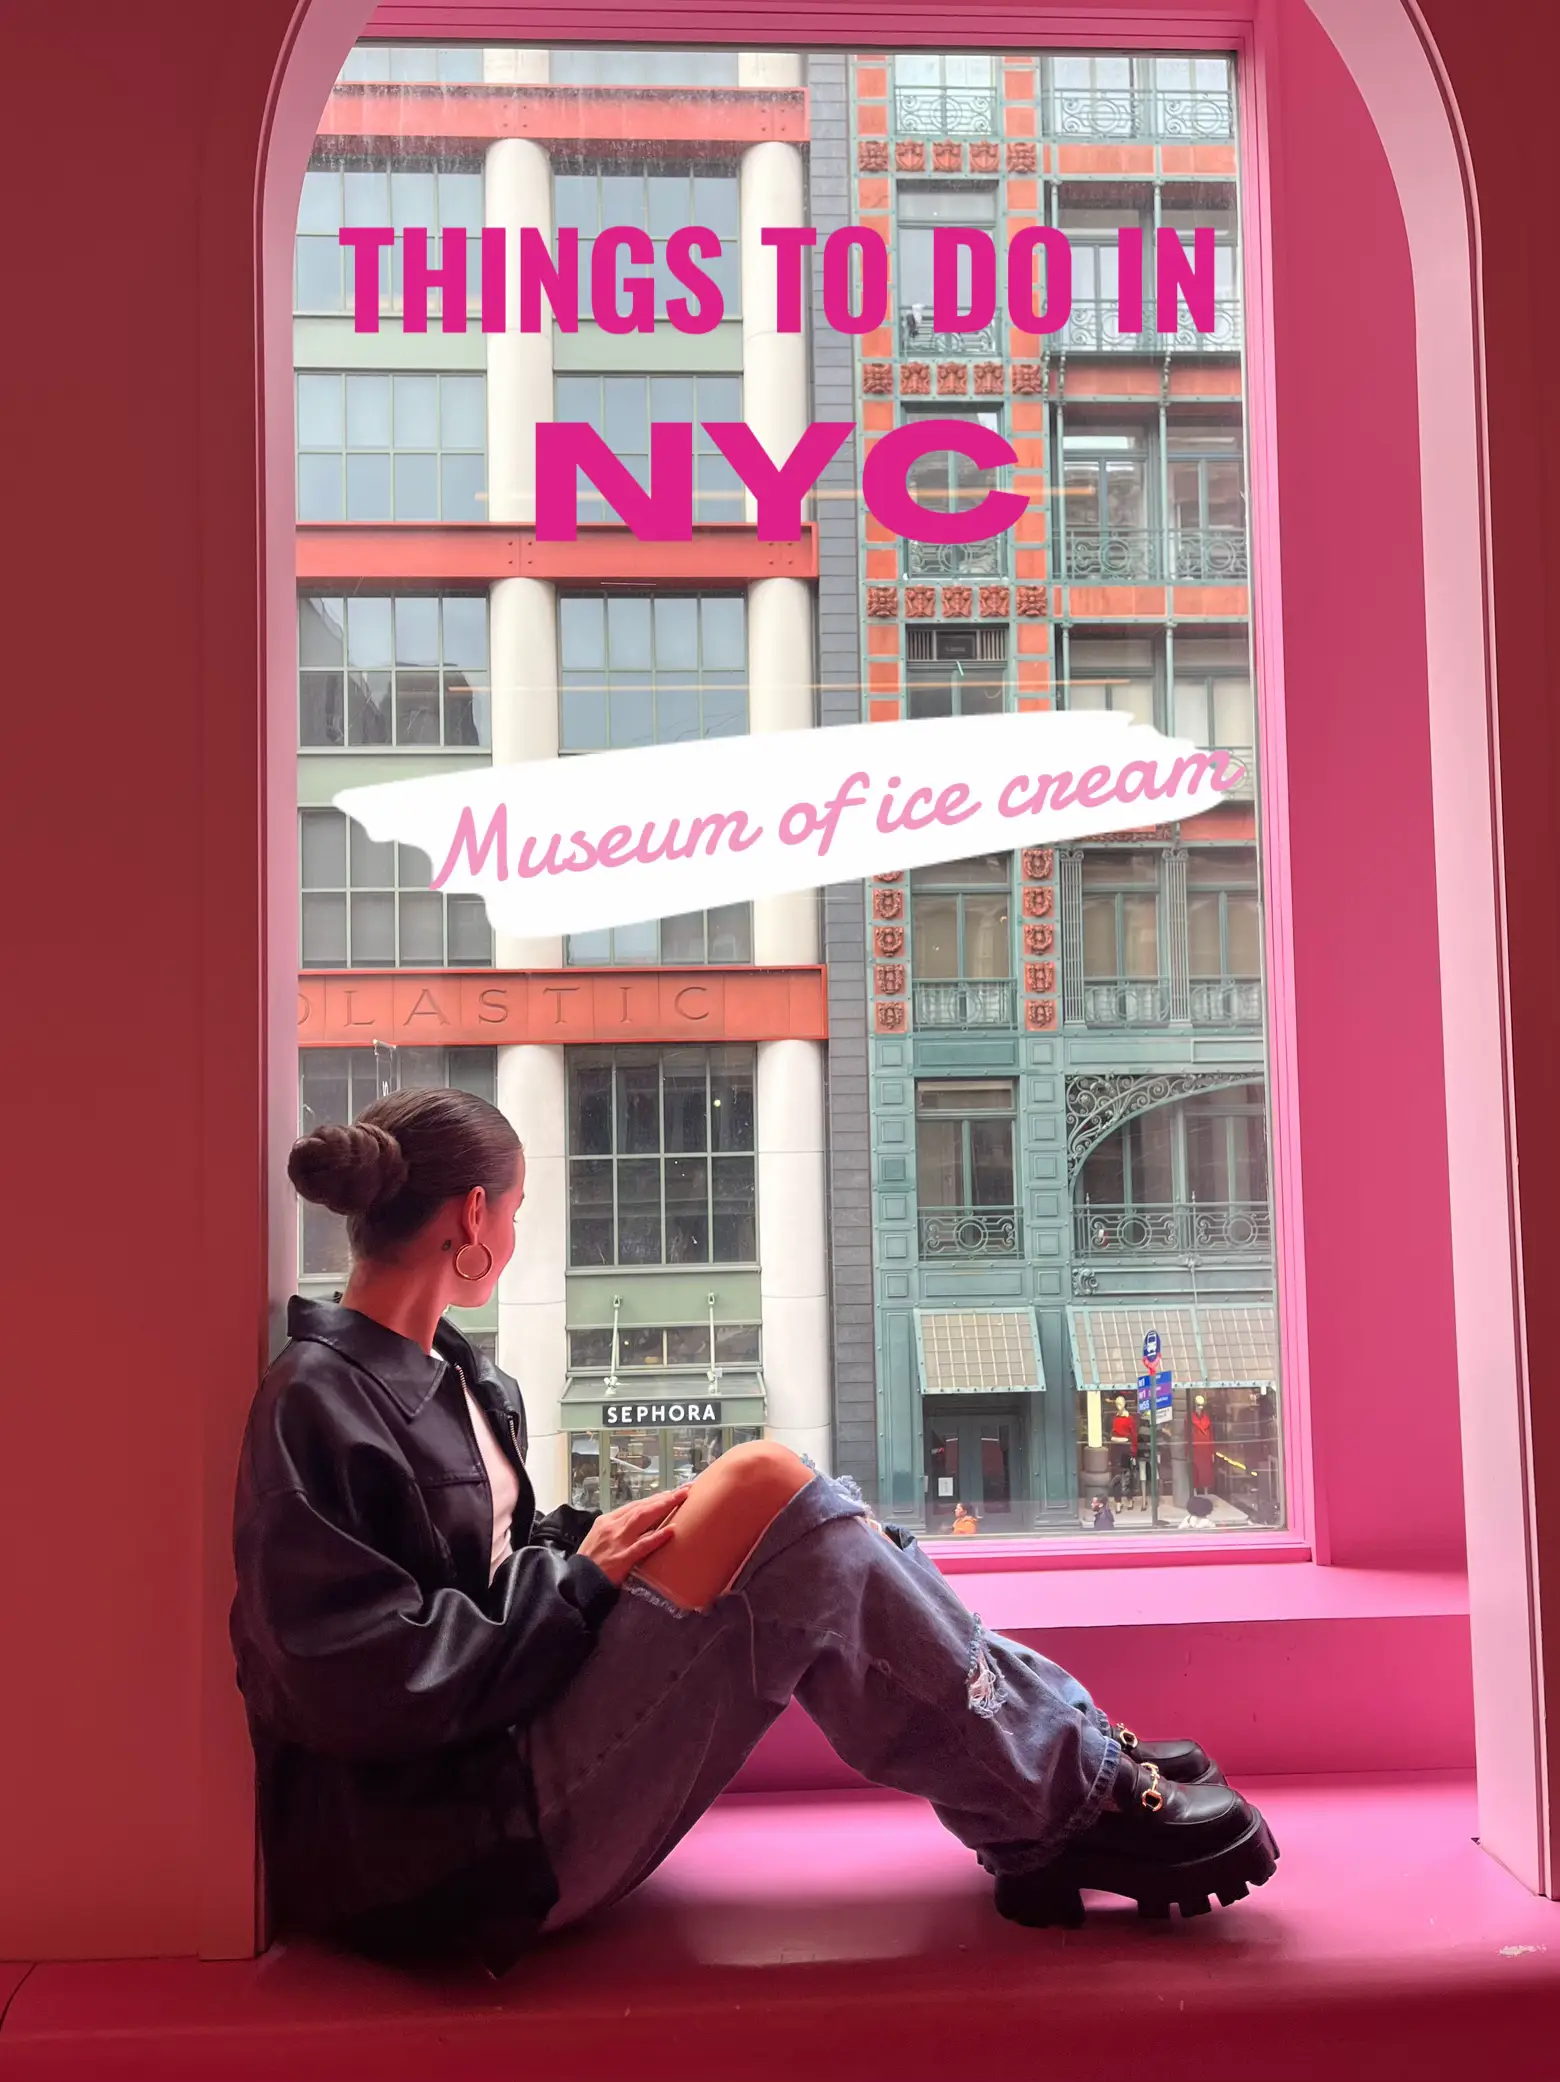 MUSEUM OF ICE CREAM - NYC 🍦💞's images